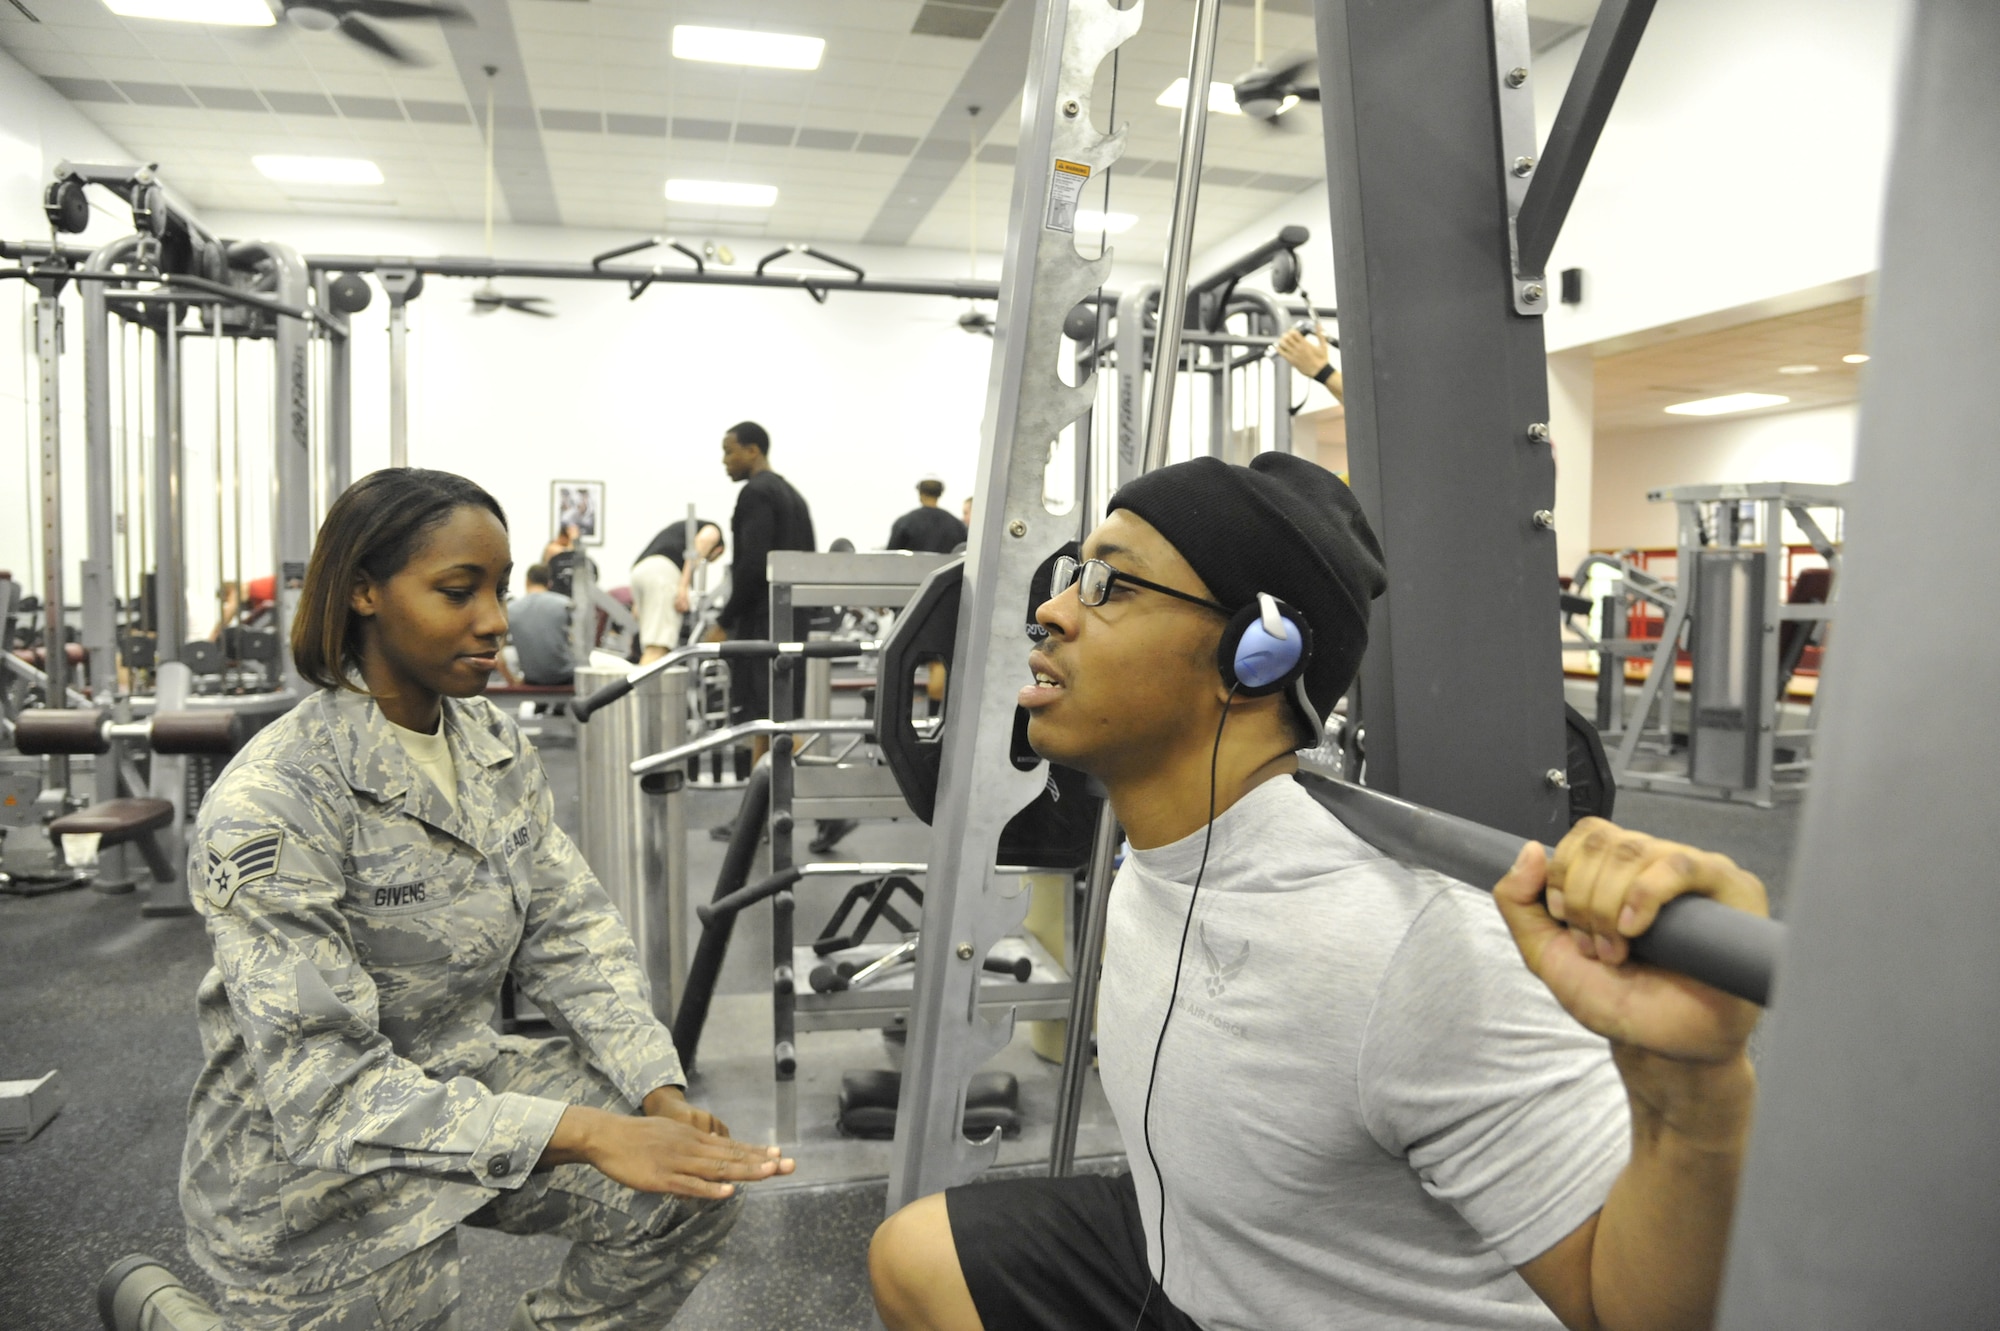 Senior Airman Melissa Givens, 509th Force Support Squadron fitness specialist, assists Senior Airman Adrian Paisley, 509th FSS fitness specialist, with squatting at the fitness center on Whiteman Air Force Base, April 22, 2013. Fitness center personnel emphasize the importance of safety to the general population every day to ensure a healthy environment. (U.S. Air Force photo by Airman 1st Class Keenan Berry/Released)